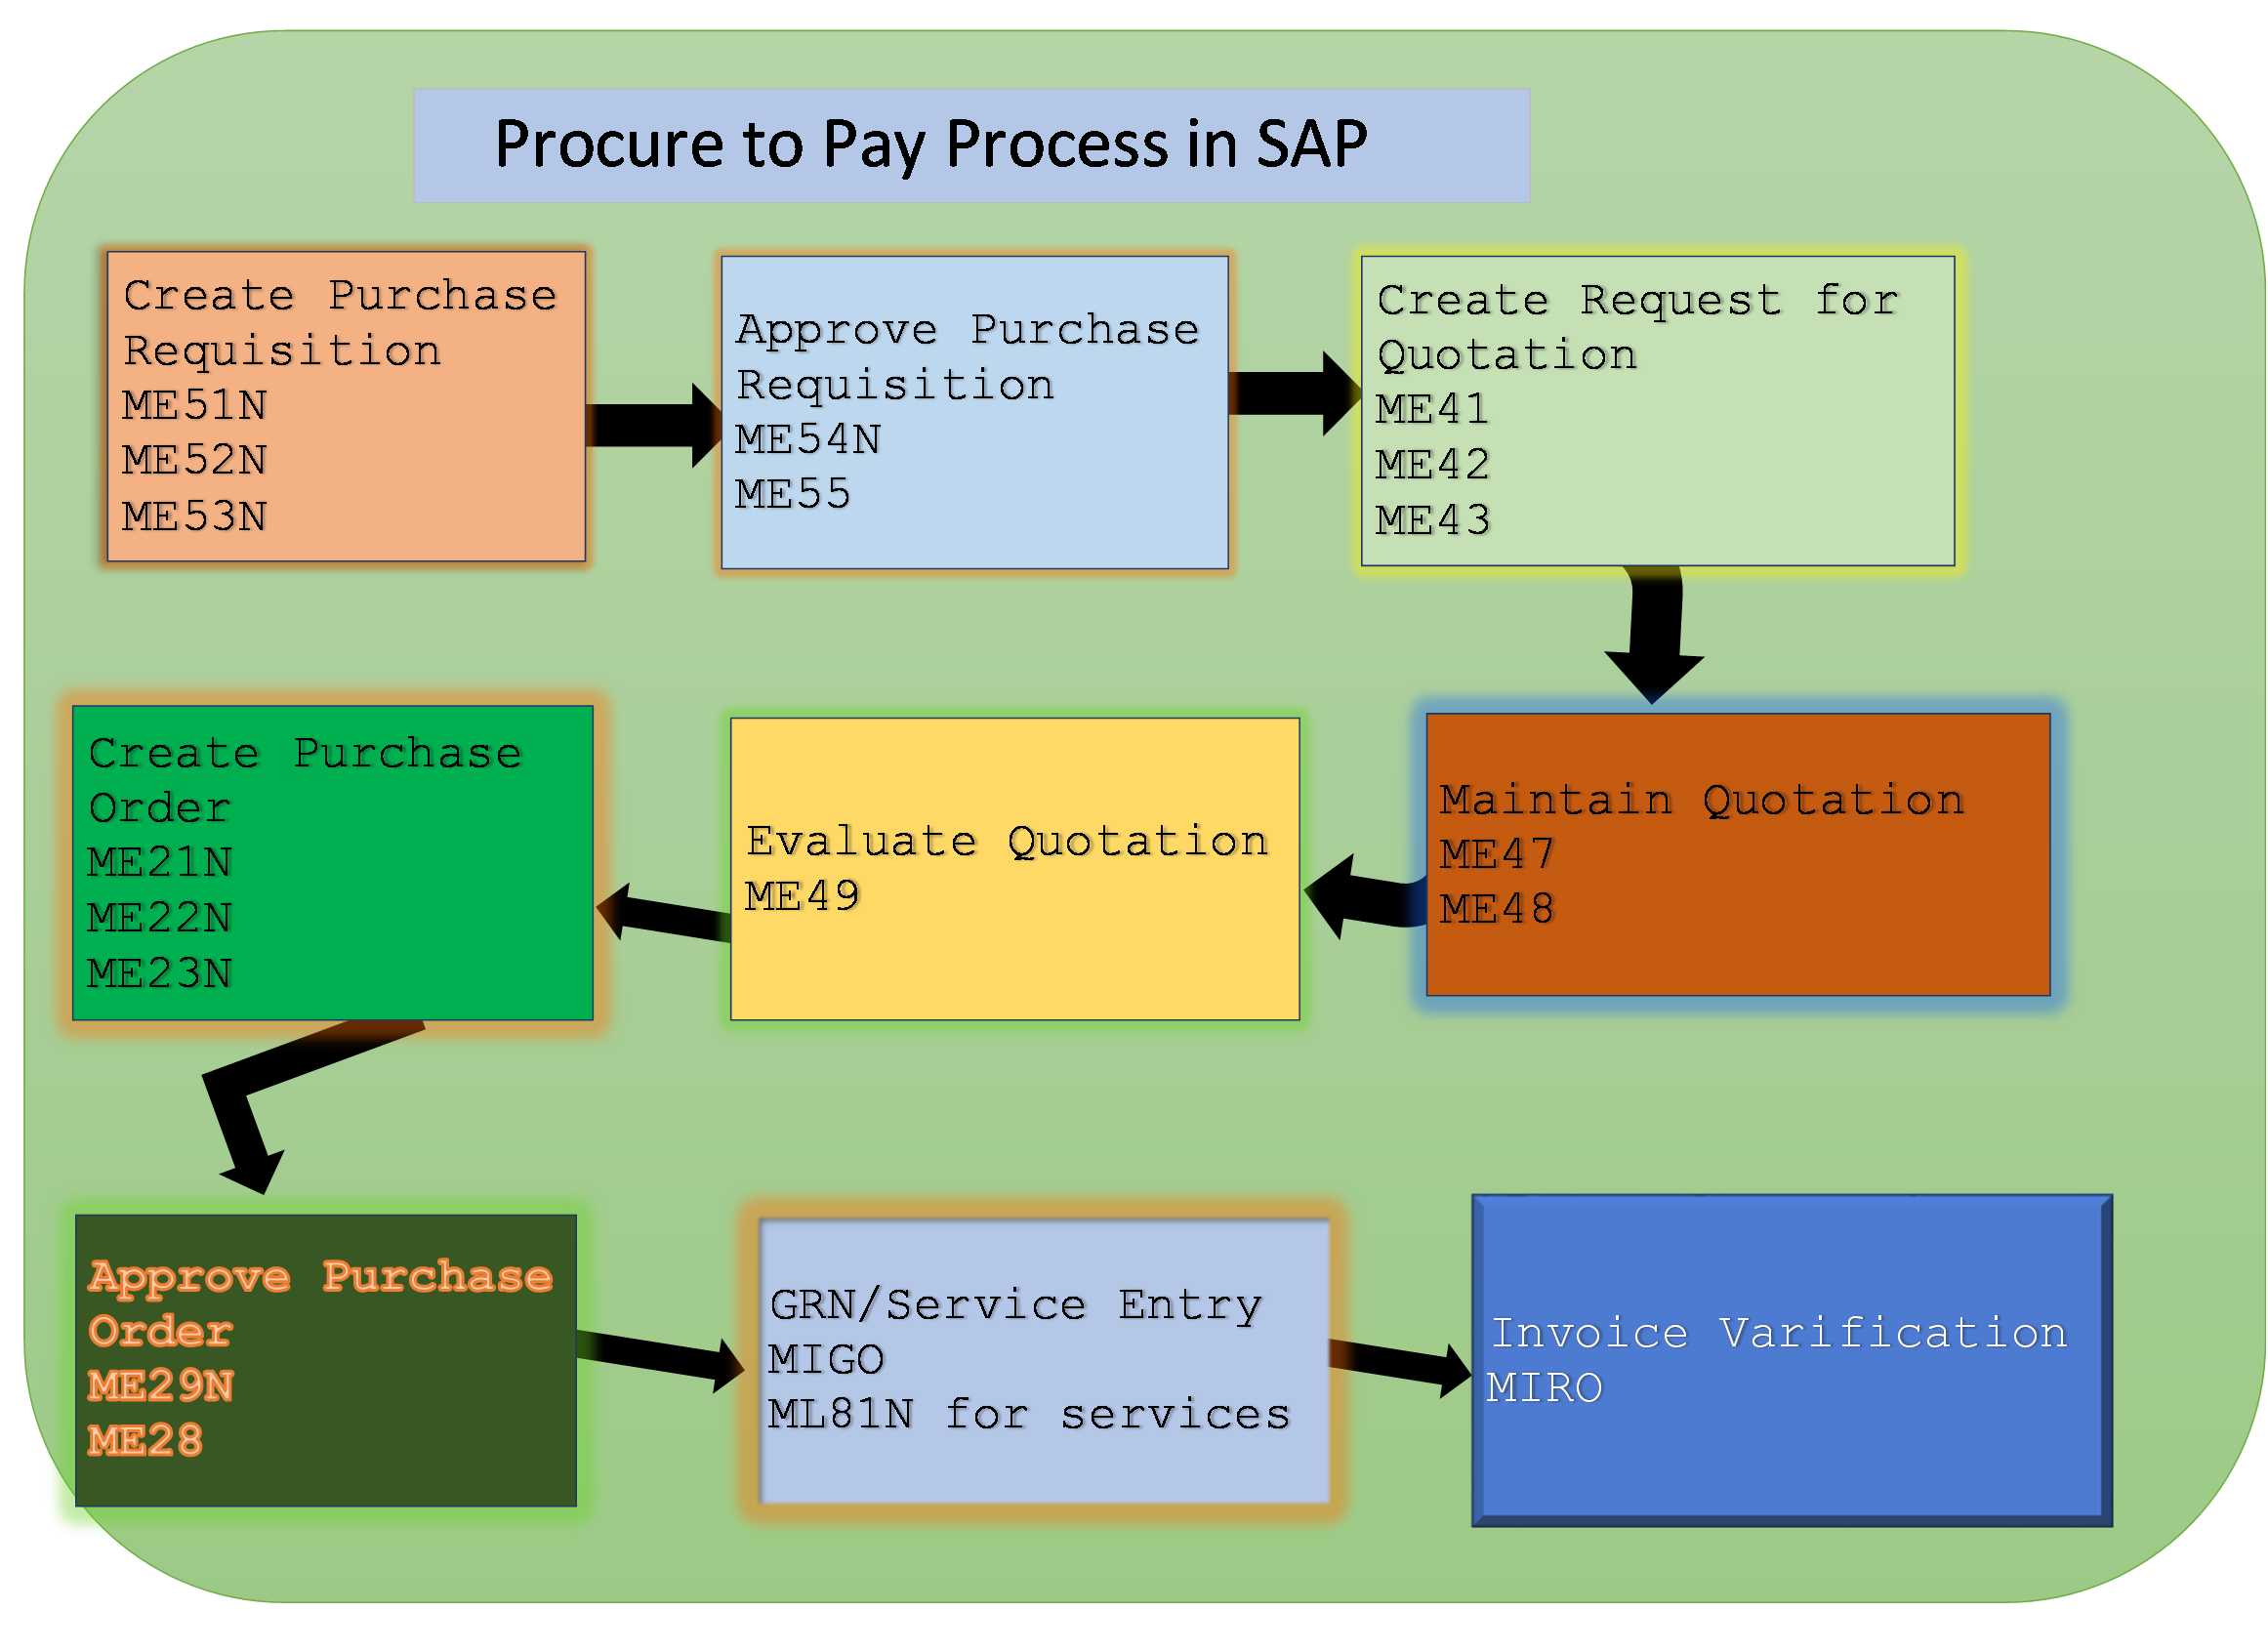 P2P Cycle in SAP